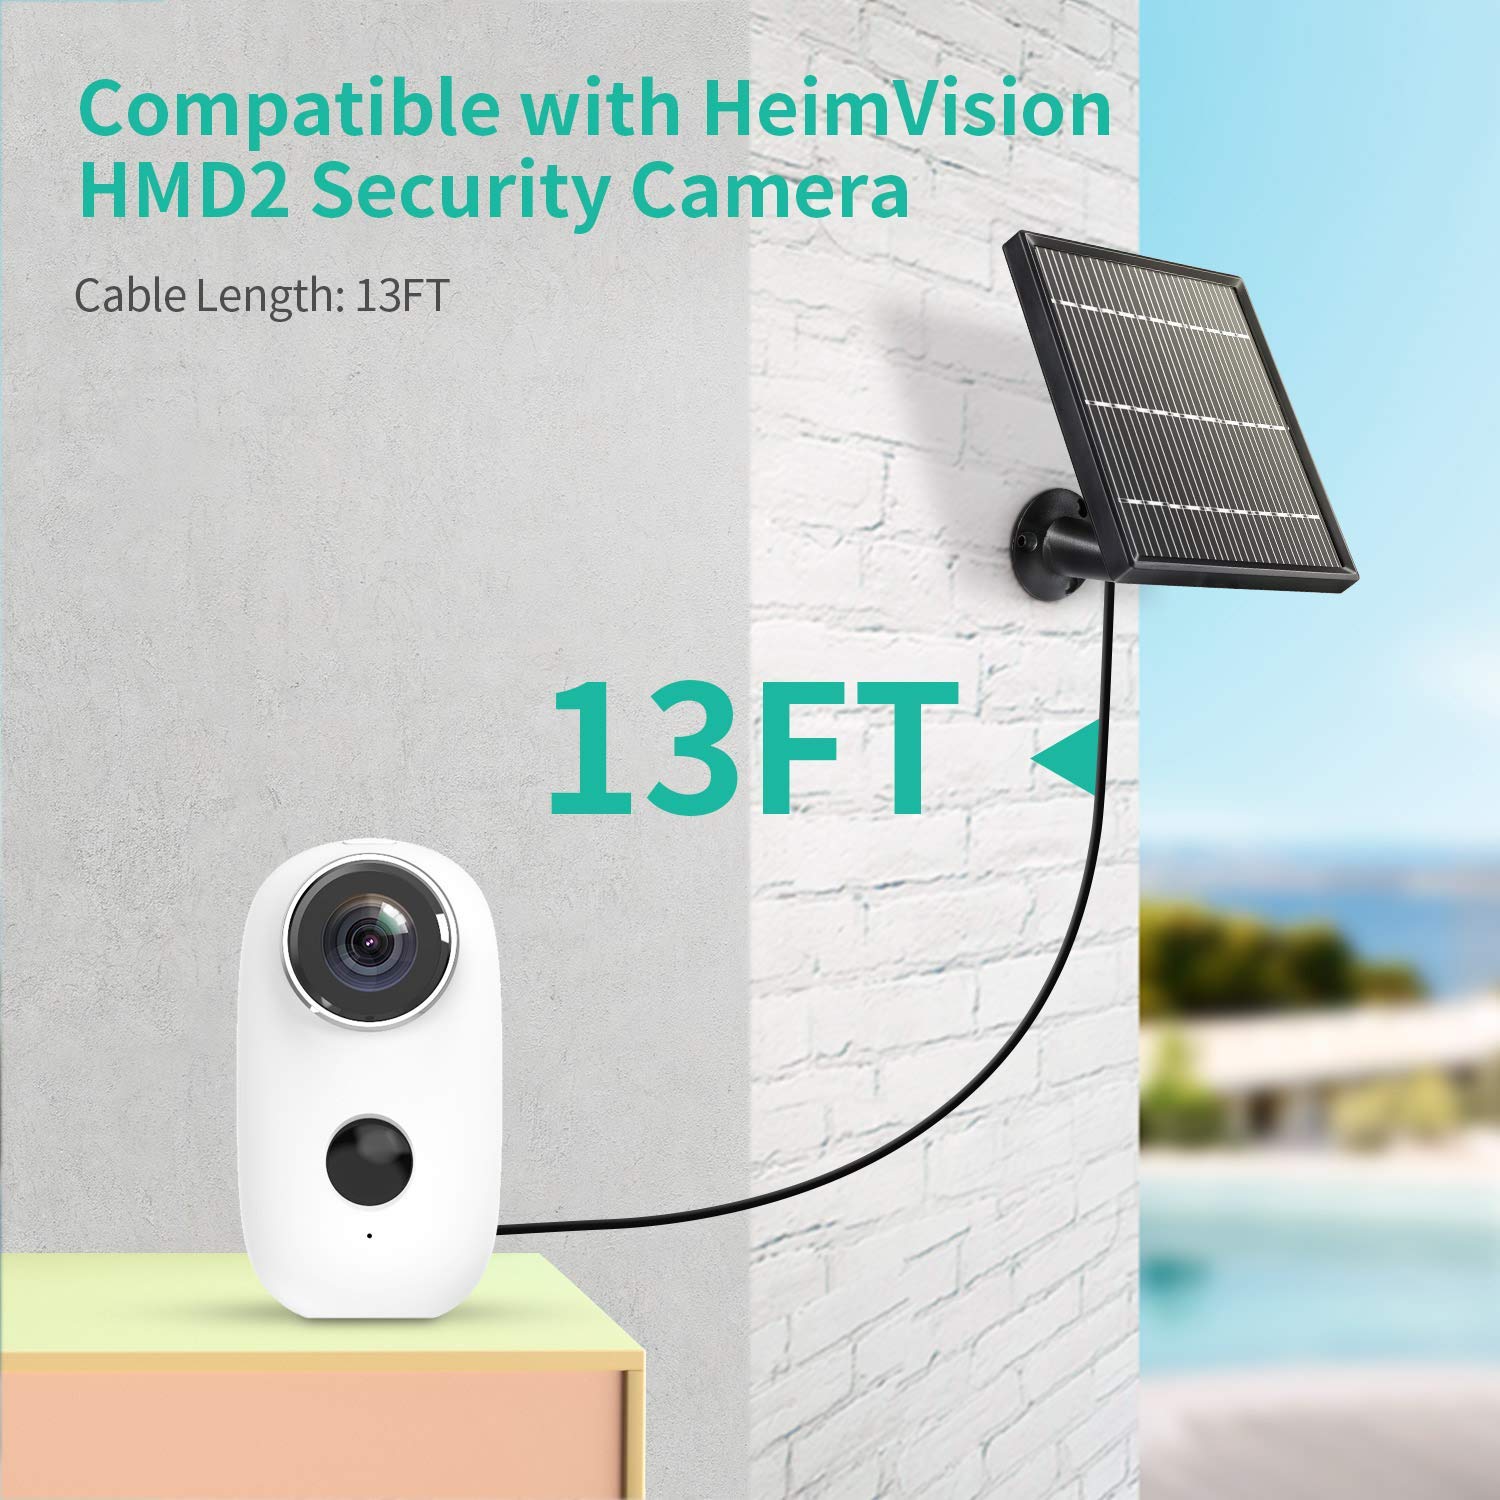 HeimVision SE01 Solar Panel Compatible with HeimVision HMD2 Security Camera, Waterproof 3.2W/ 5.5V Solar Panel with 13ft/ 4m USB Cable, Support Continuously Supply Power for Security Camera - image 5 of 6